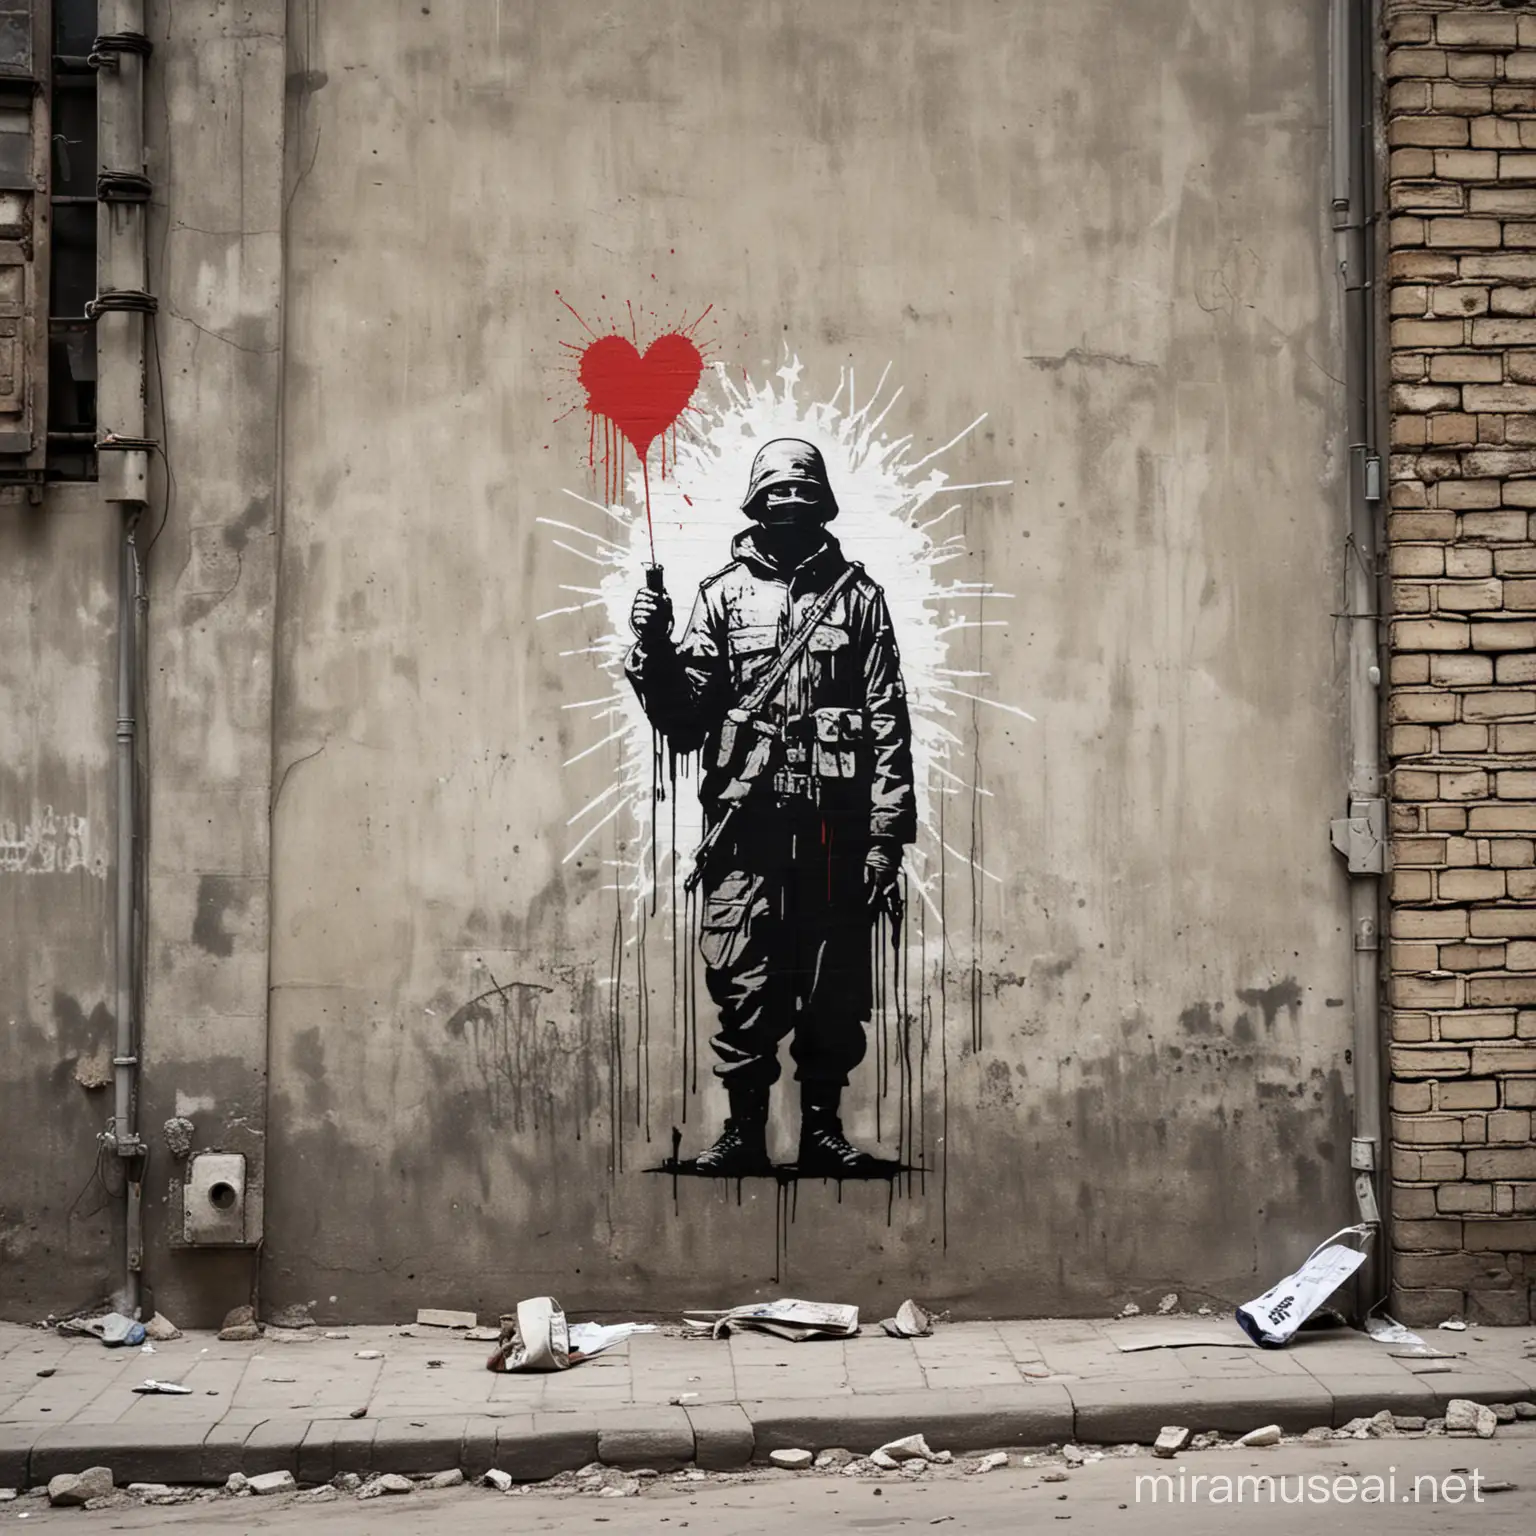 Make me Banksy grafiti. 3 colors. Make the art about the Ukrainan-Russian war. The grafiti is in an alleyway
